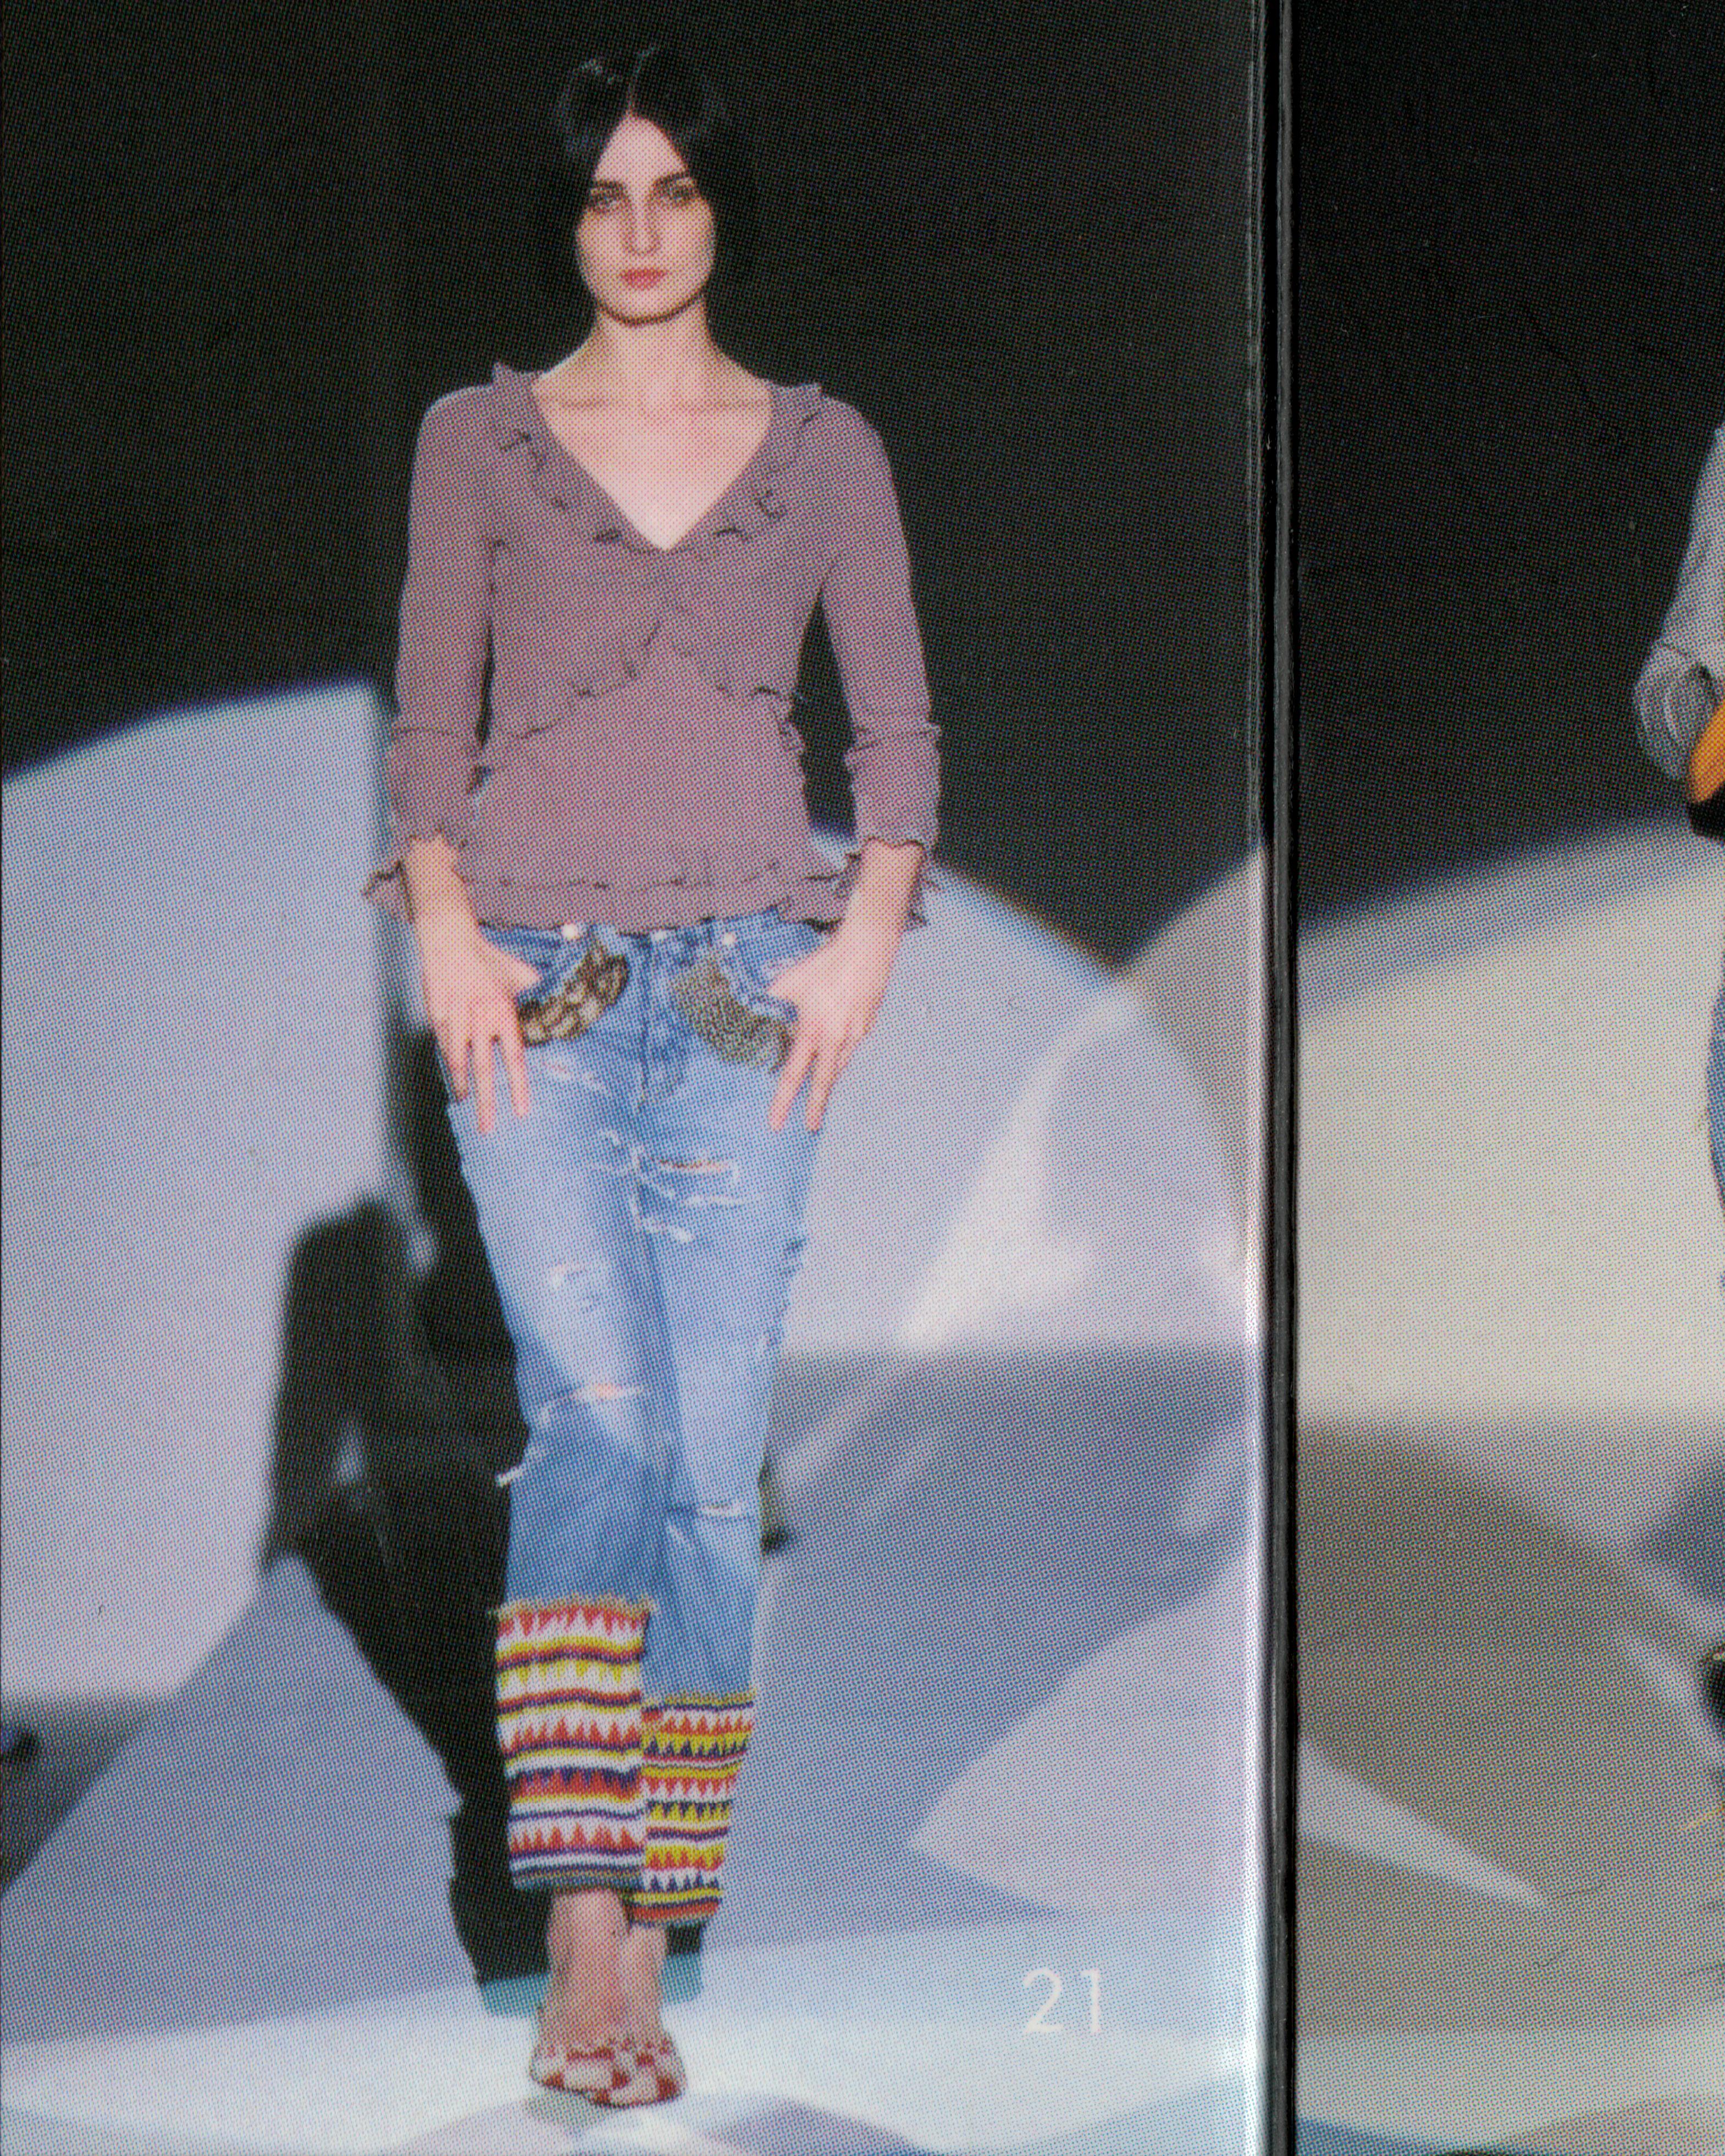 Gucci by Tom Ford iconic runway ensemble. Grey silk blouse with ruffled trim, beaded and feathered denim jeans, and yellow silk feathered sandals.   

Spring-Summer 1999  

Top - IT 42 - FR 38 - UK 10 - US 6
Pants - IT 40 - FR 36 - UK 18 - US